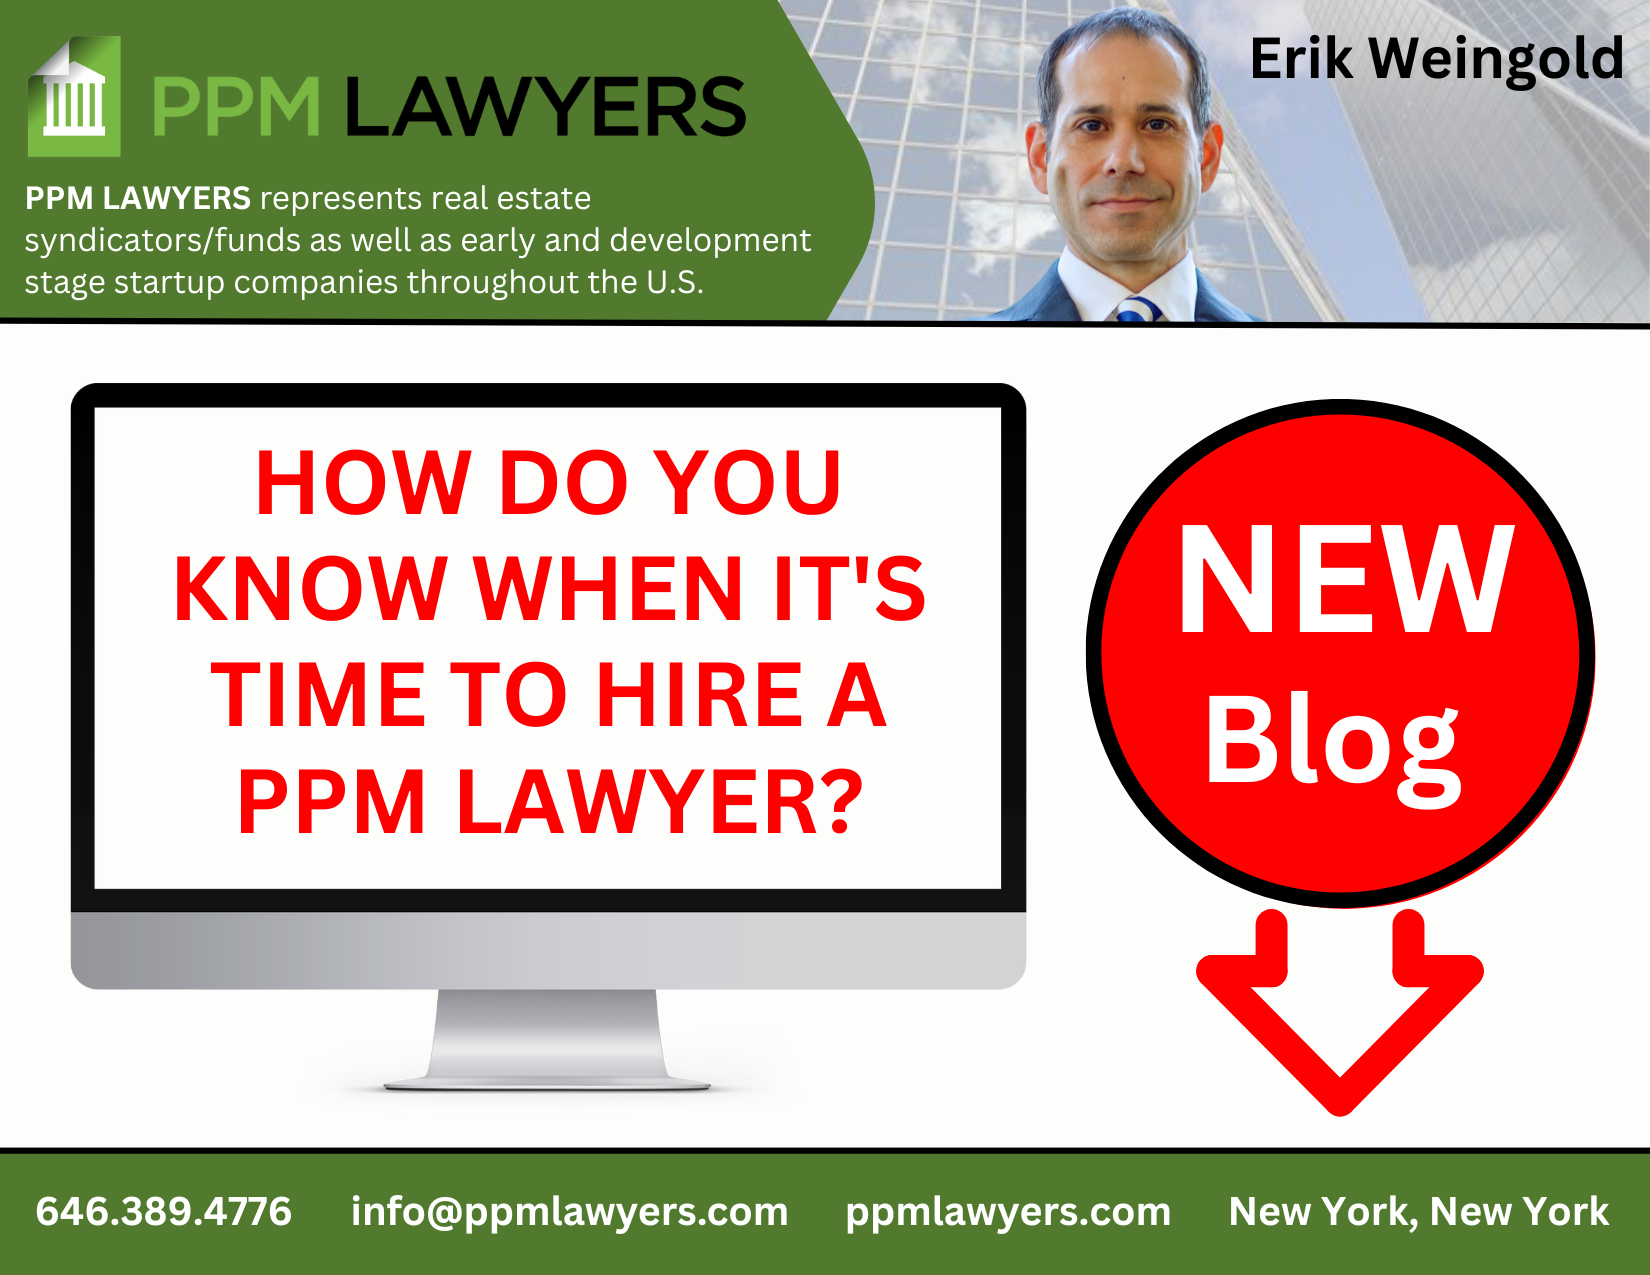 How Do You Know When It’s Time To Hire A PPM Lawyer?